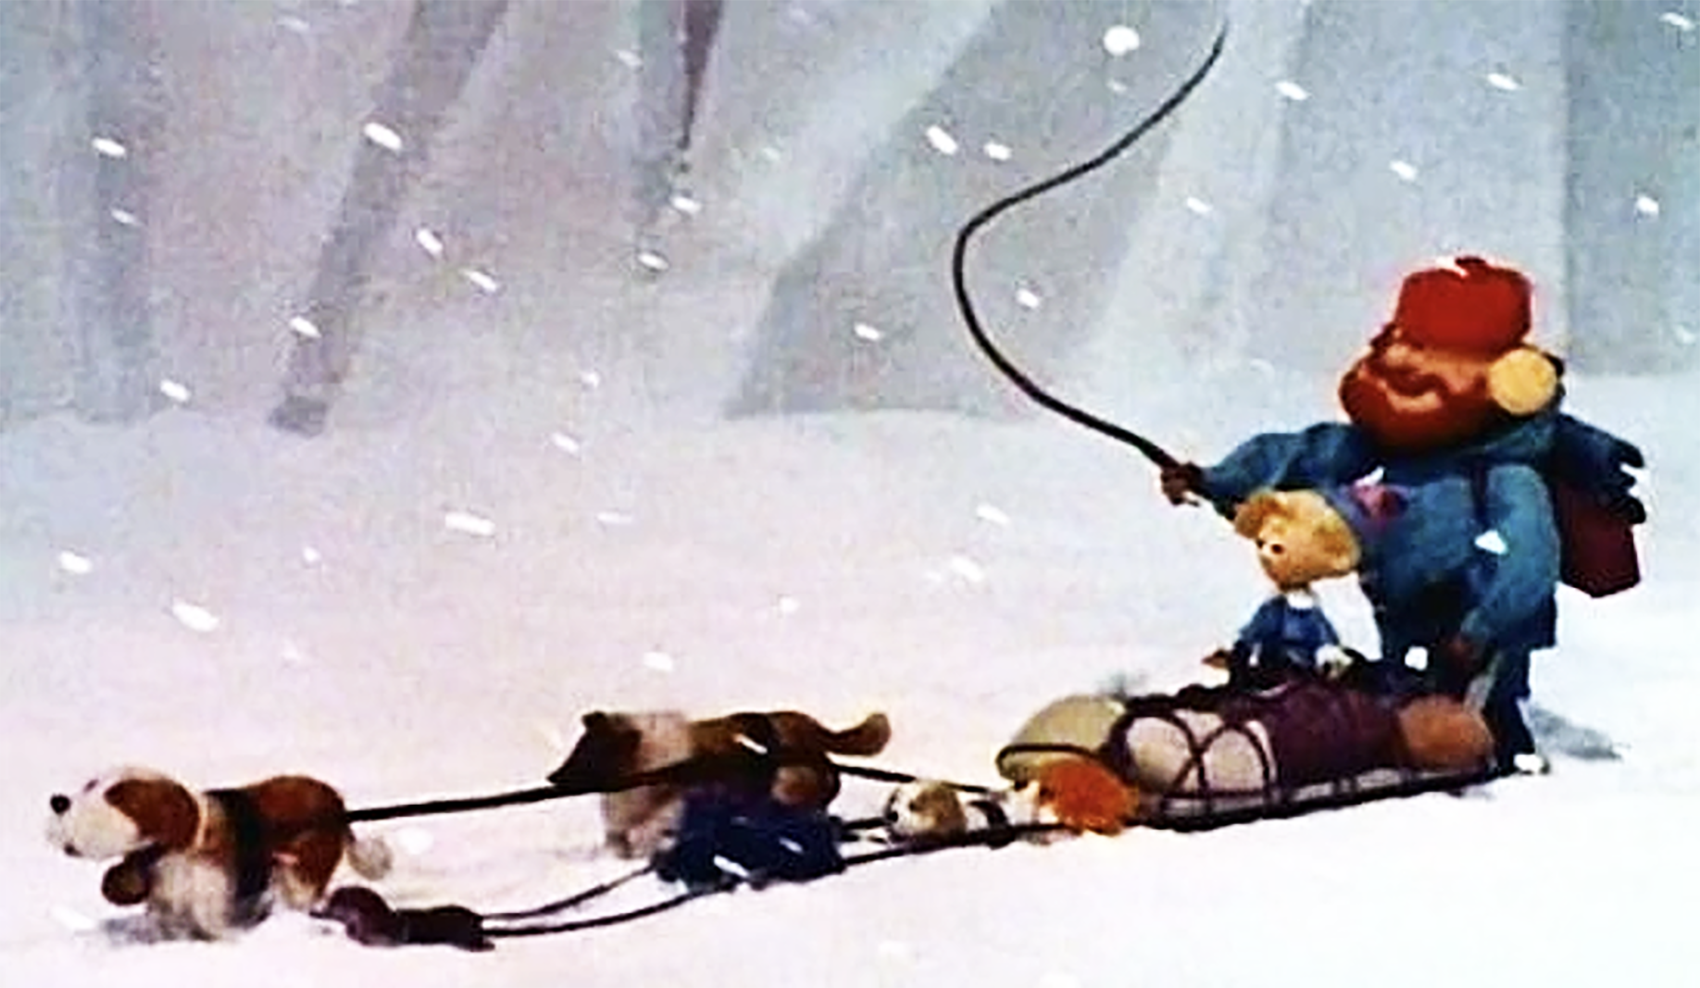 The prospector Cornelius and his team of sled dogs. Hermey is on the sled with Cornelius.